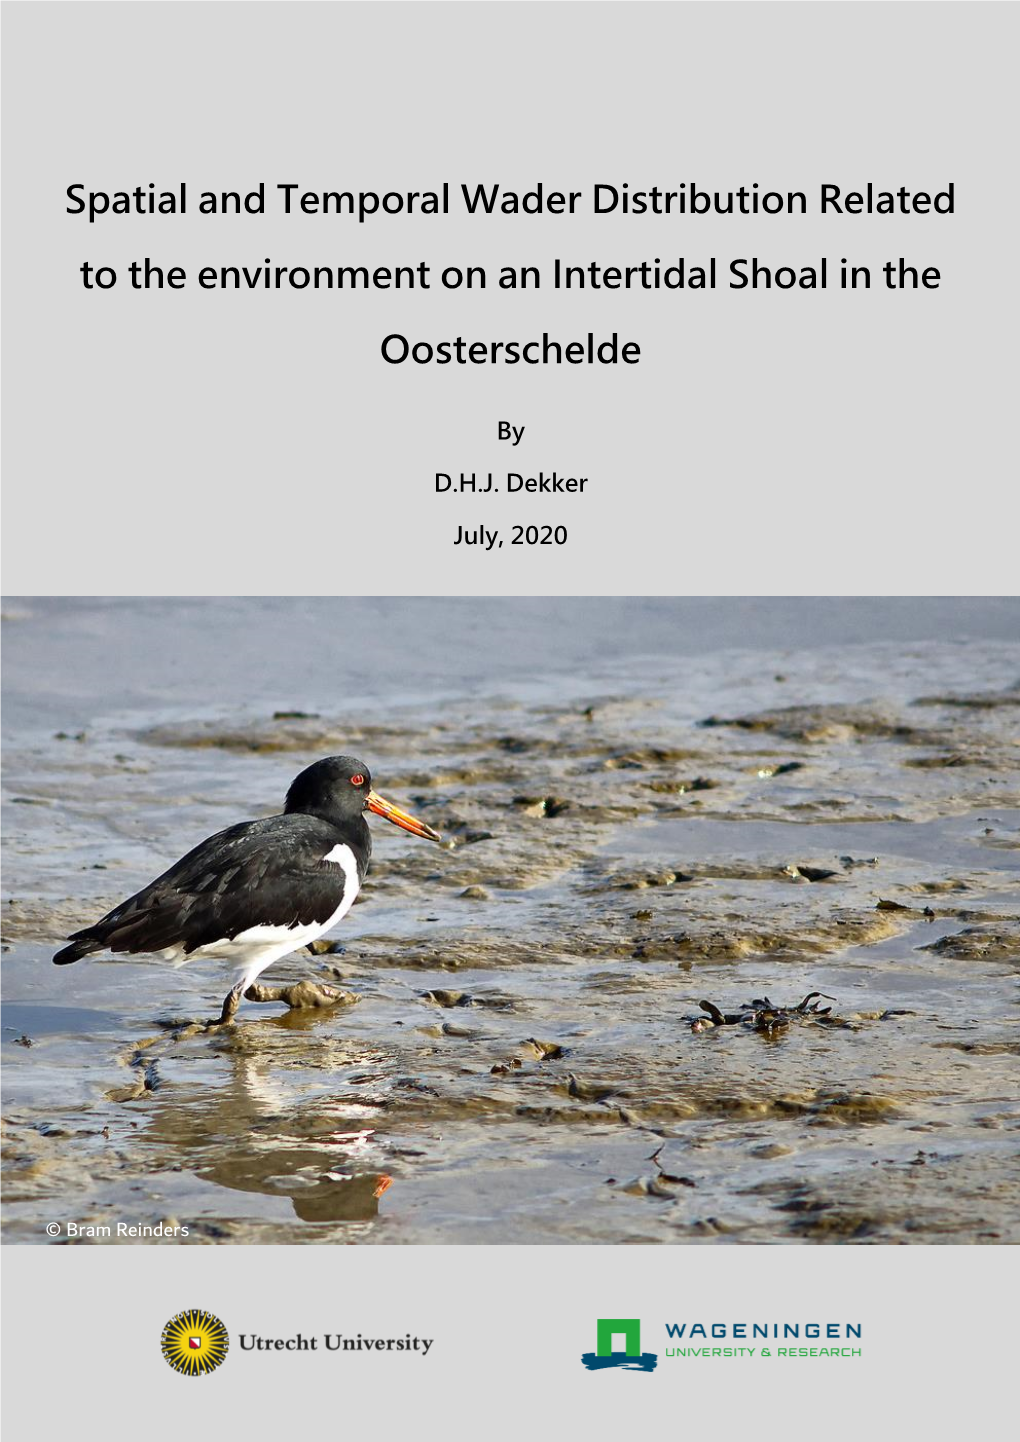 Spatial and Temporal Wader Distribution Related to the Environment on an Intertidal Shoal in the Oosterschelde